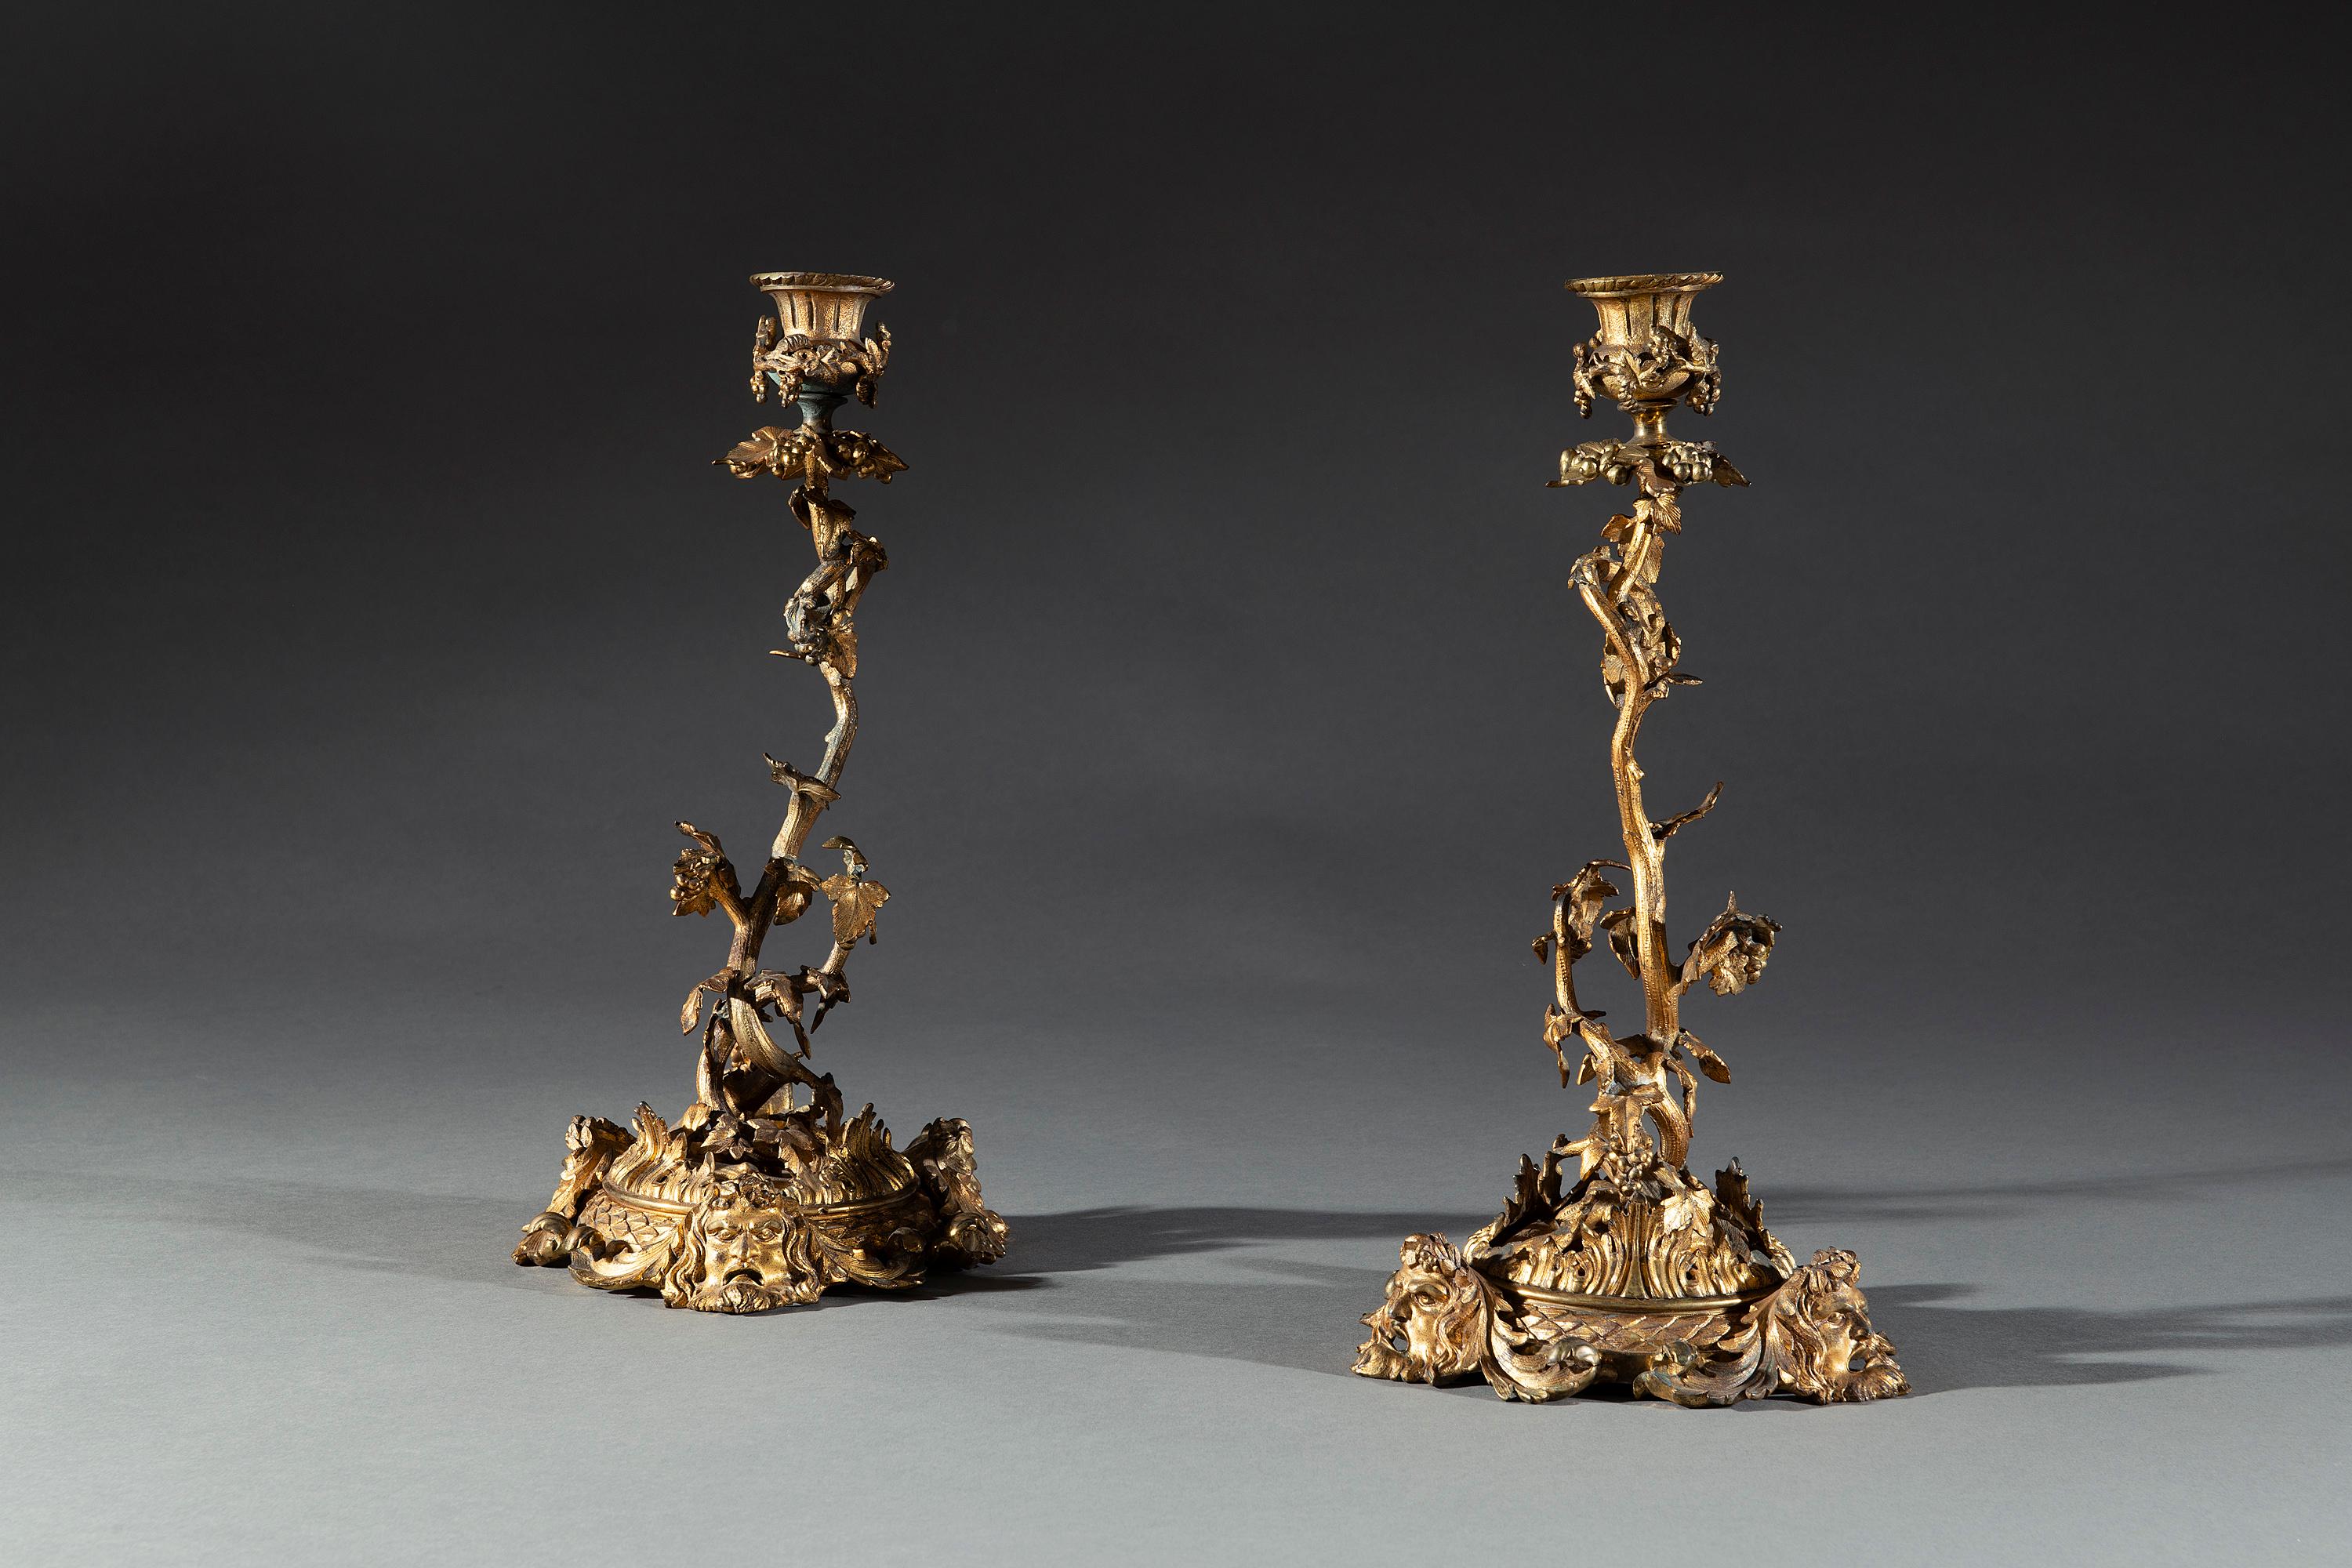 The large pair of gilt candlesticks with cast thistle cup candle holders are adorned with vine leaves and grapes. The stems each consist of a twisting vine with leaves and bunches of young grapes. The vine stems emerge from rising leaves and a